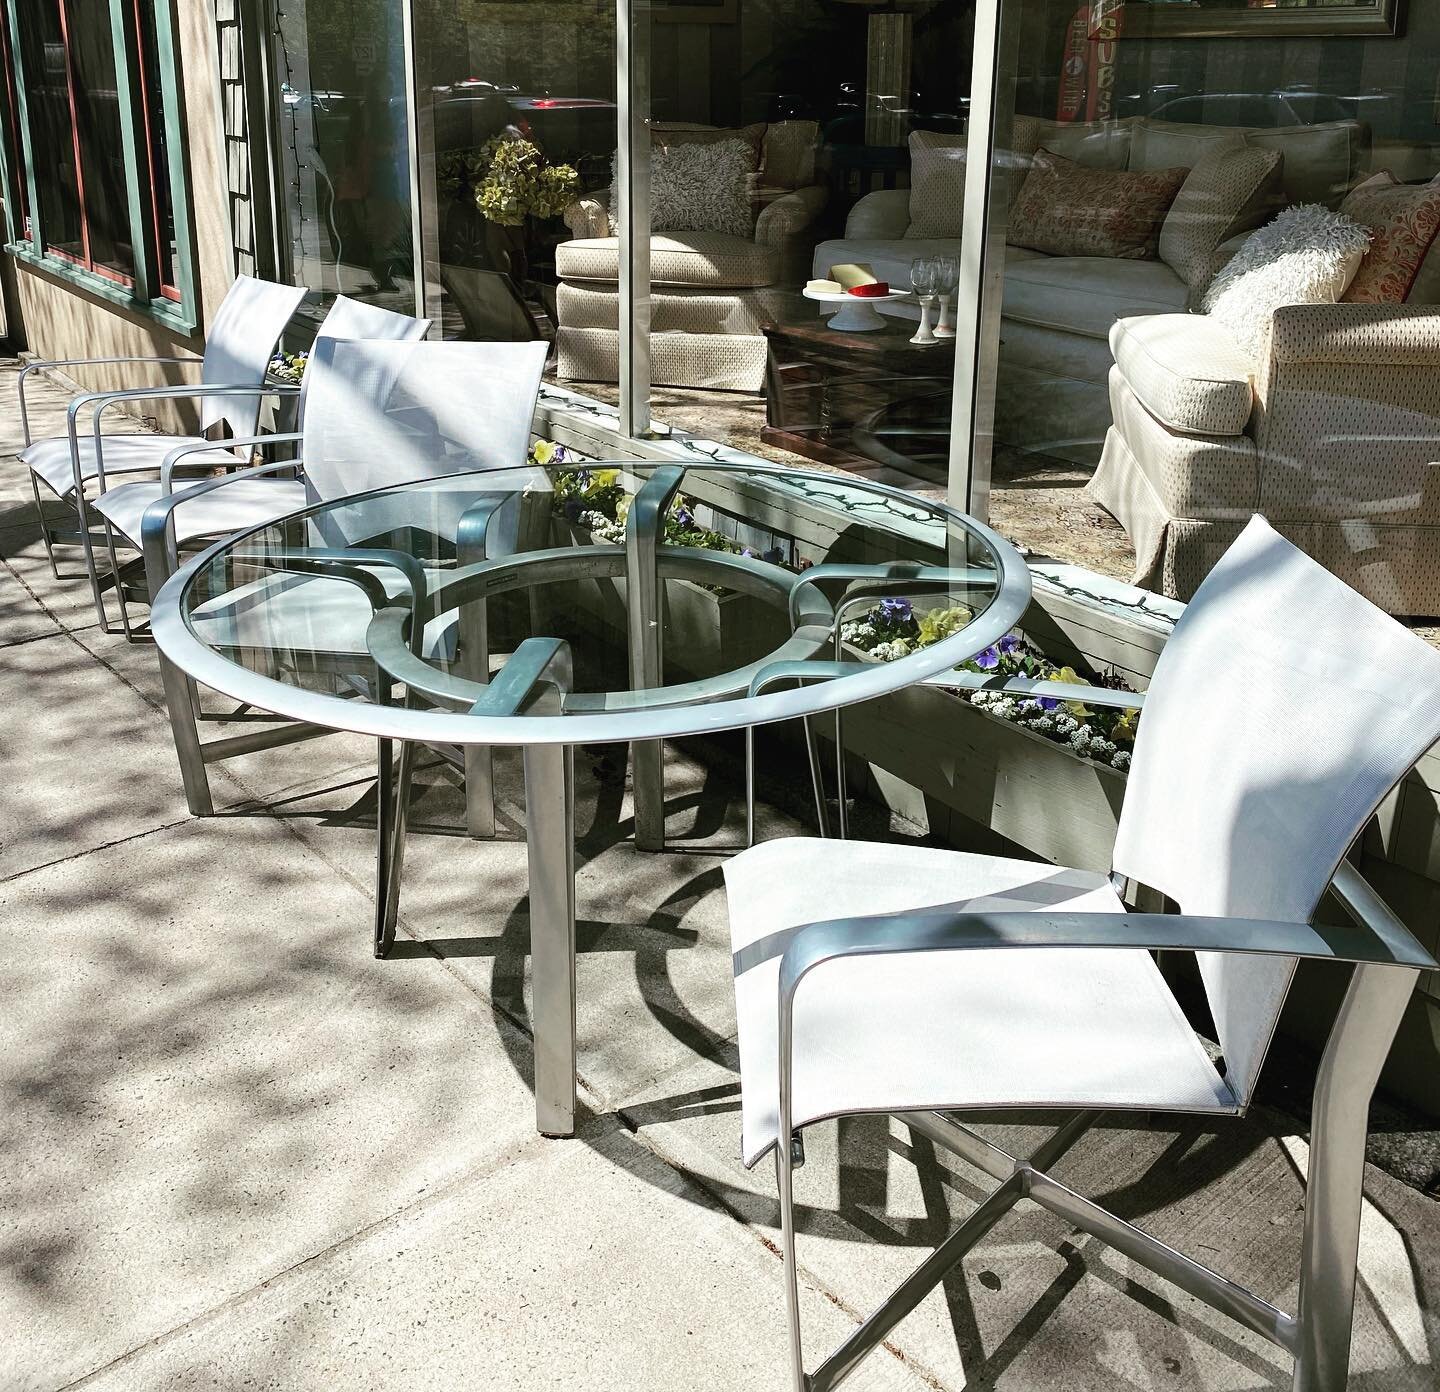 Brown Jordan set - fabulous 💕 beautiful day for new outdoor furniture- not shown in photo lounge chair and side table. Dm for more information #brownjordan #brownjordanfurniture #outdoordining